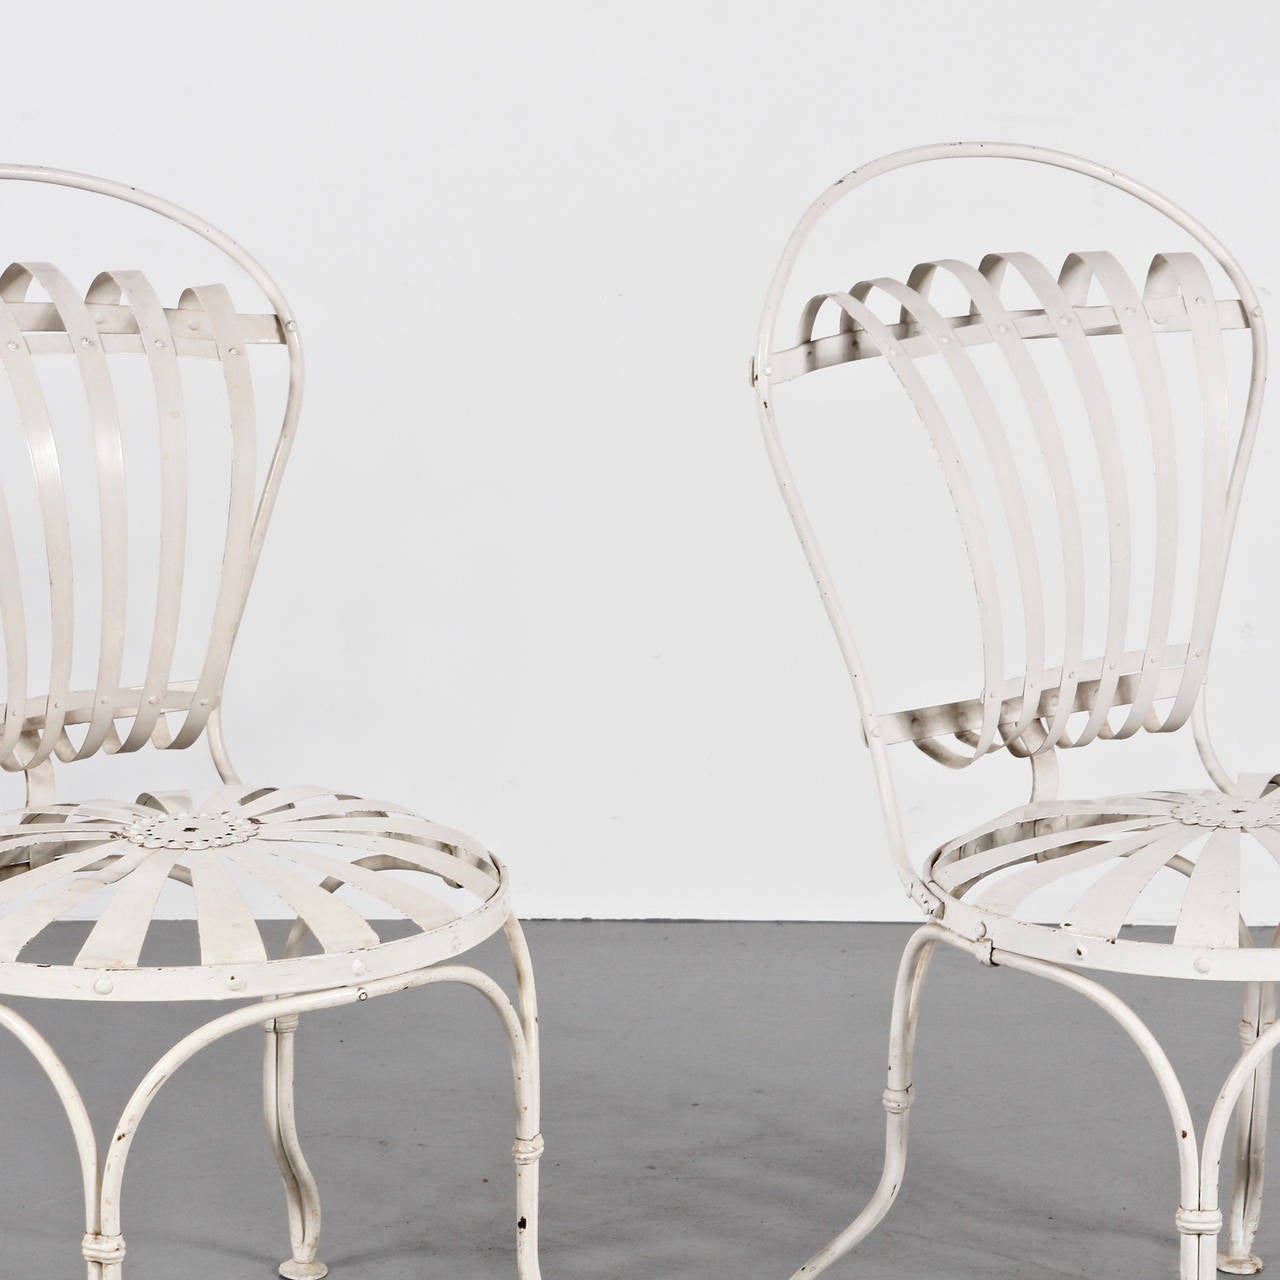 Pair of Francois Carre garden chairs manufactured, circa 1930 in France.
Metal legs and structure, metal seat and backrest.

In good vintage condition with minor wear consistent with a age and use, preserving a beautiful patina.

This model of